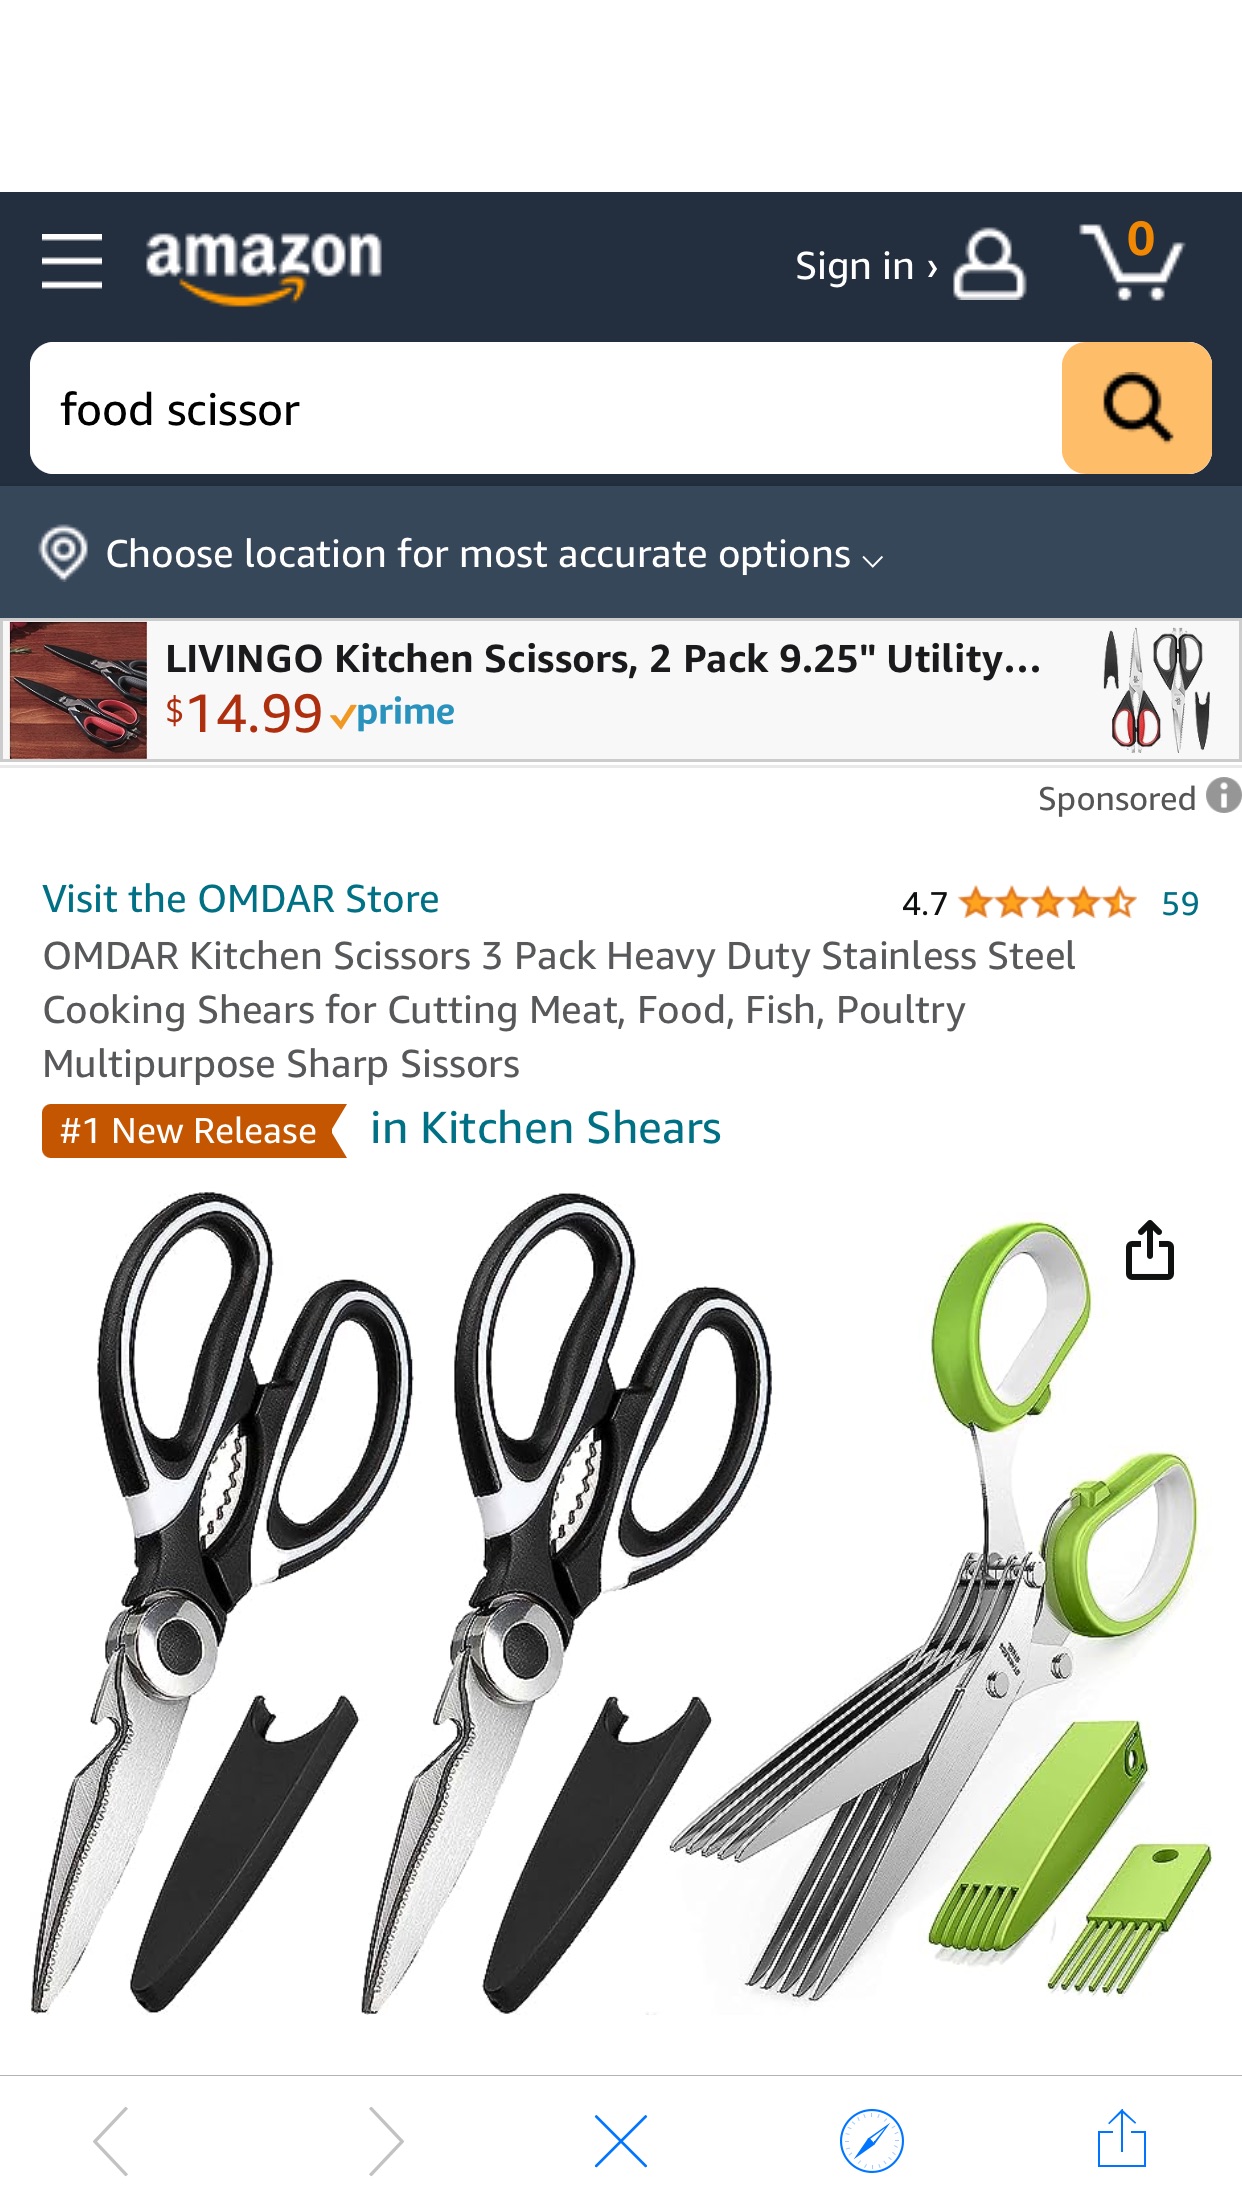 Amazon.com: OMDAR Kitchen Scissors 3 Pack Heavy Duty Stainless Steel Cooking Shears for Cutting Meat, Food, Fish, Poultry Multipurpose Sharp Sissors : Home & Kitchen